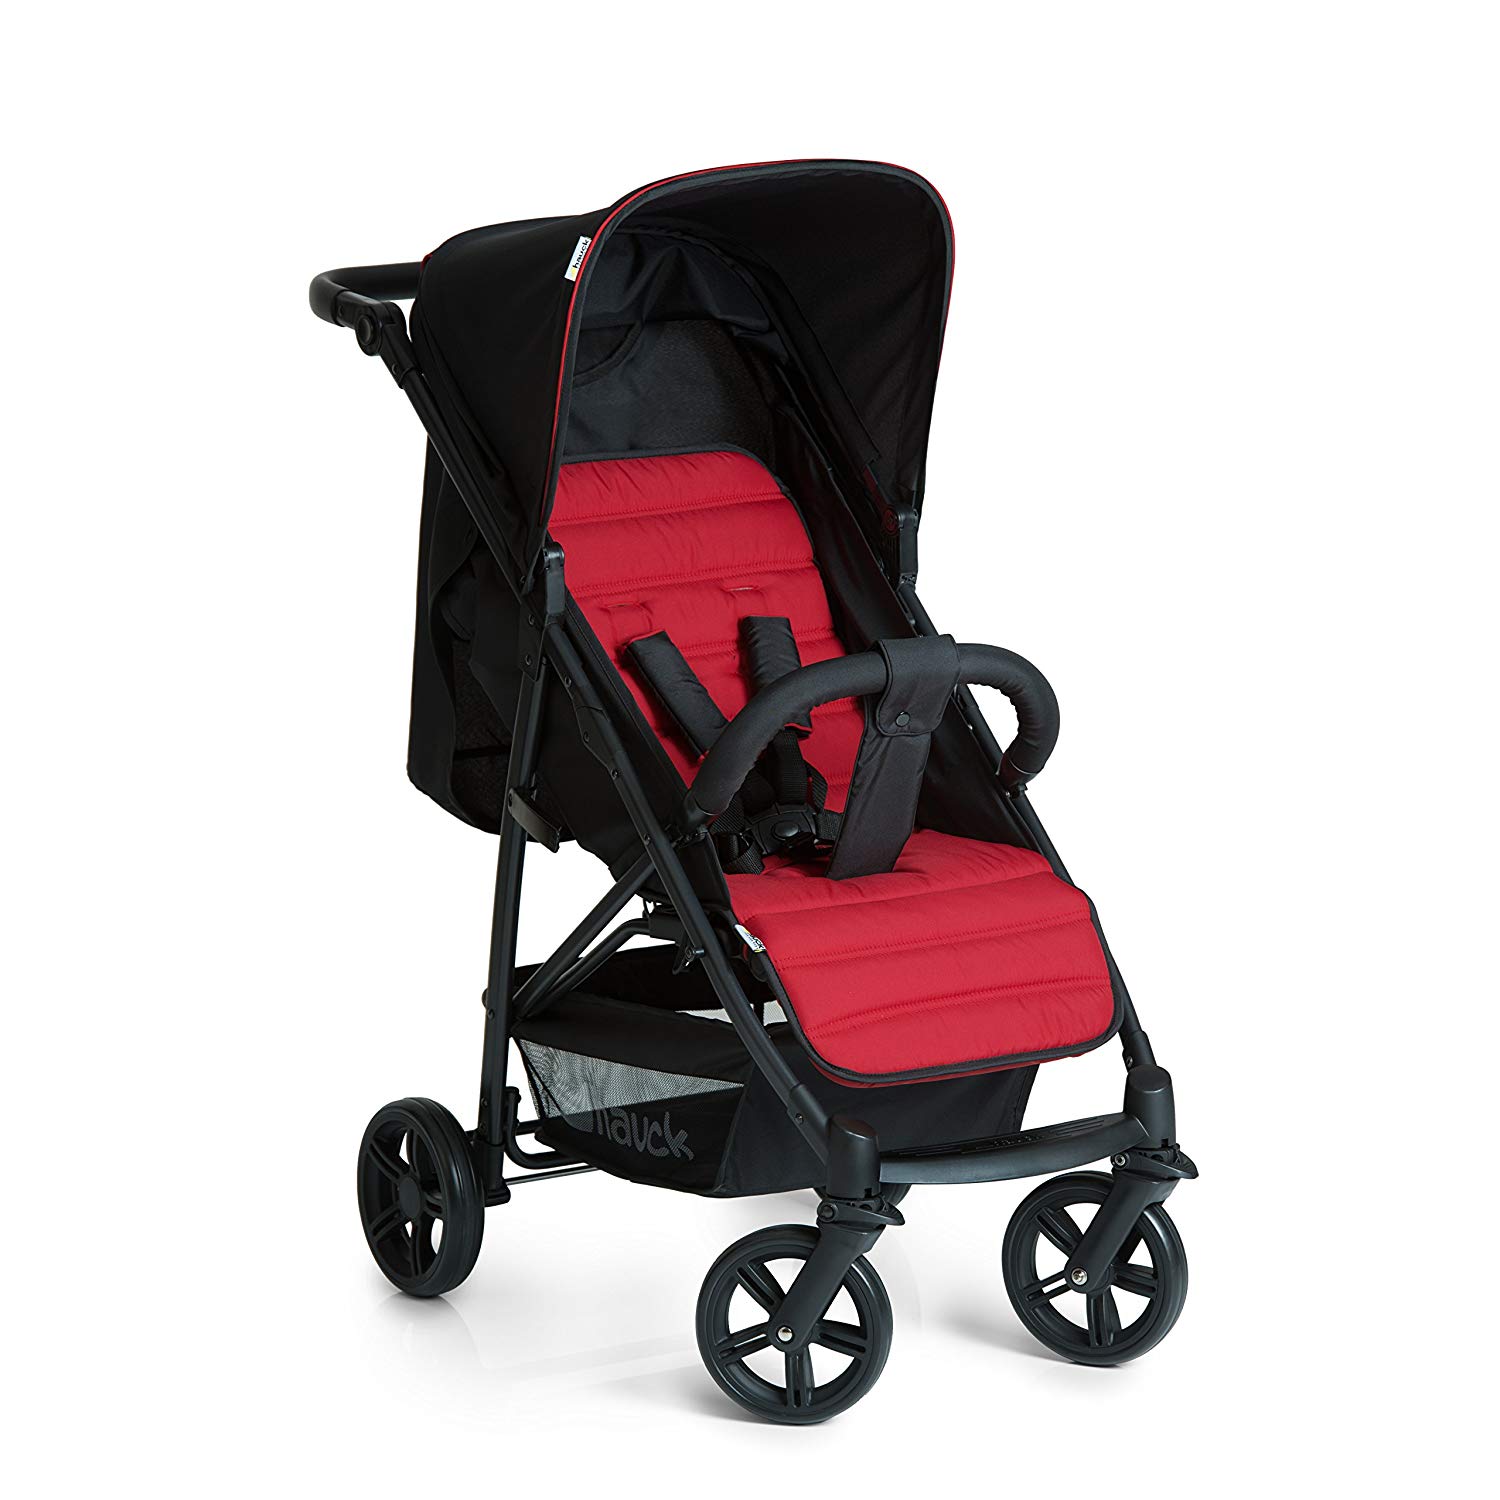 Hauck Buggy Rapid 4, Maximum Load 25 kg, Quick Folding, Compact, Height Adjustable, Reclining Position from Birth, Large Shopping Basket, Black Red